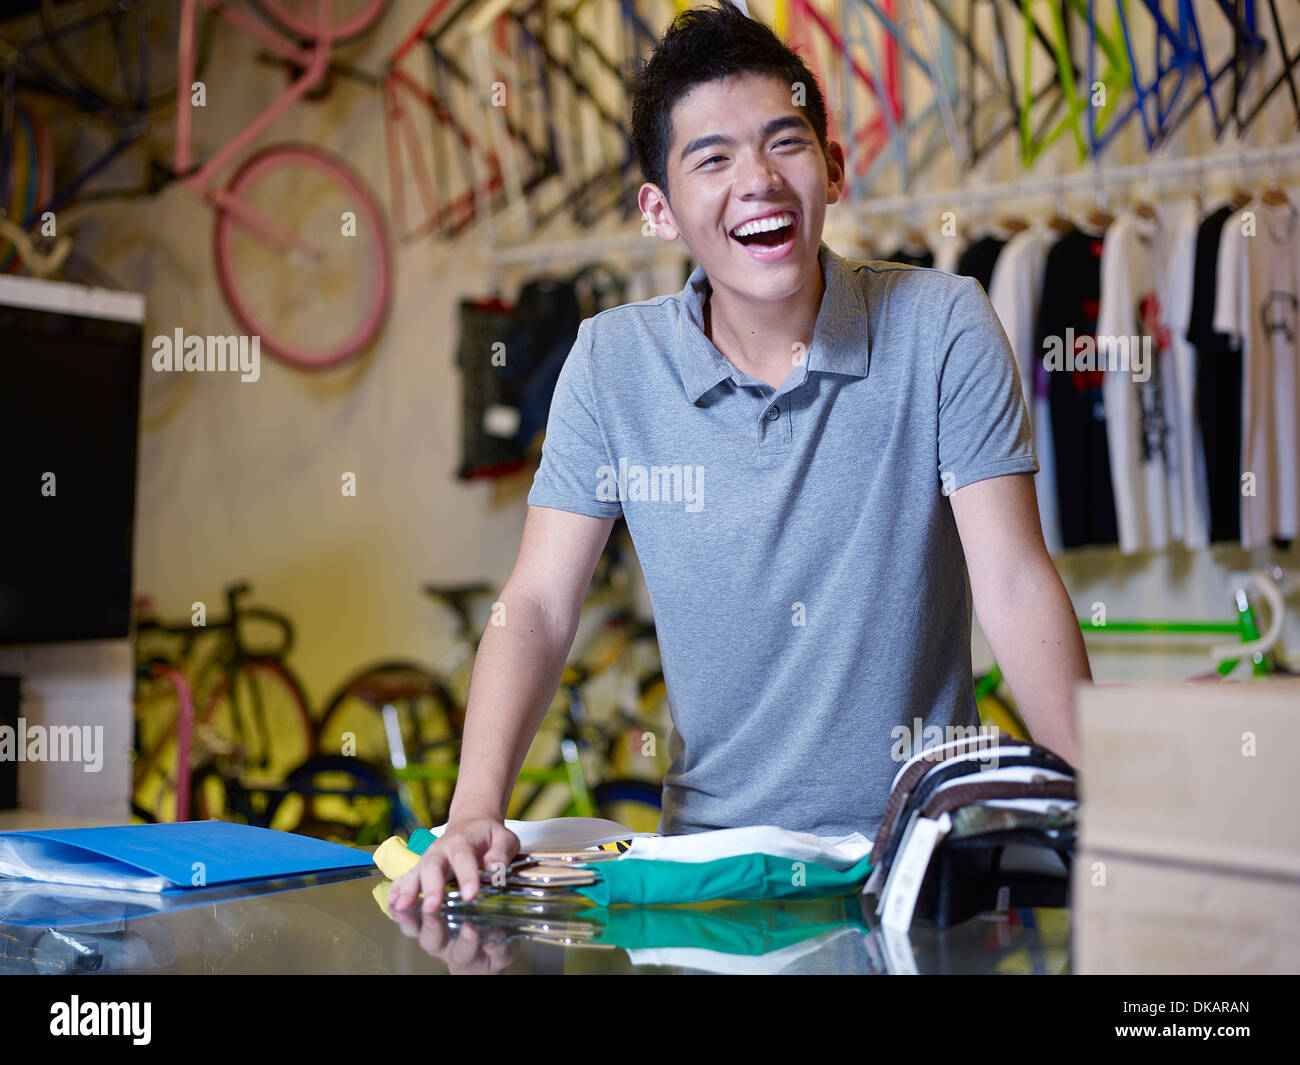 Portrait of young man laughing in bike shop Stock Photo